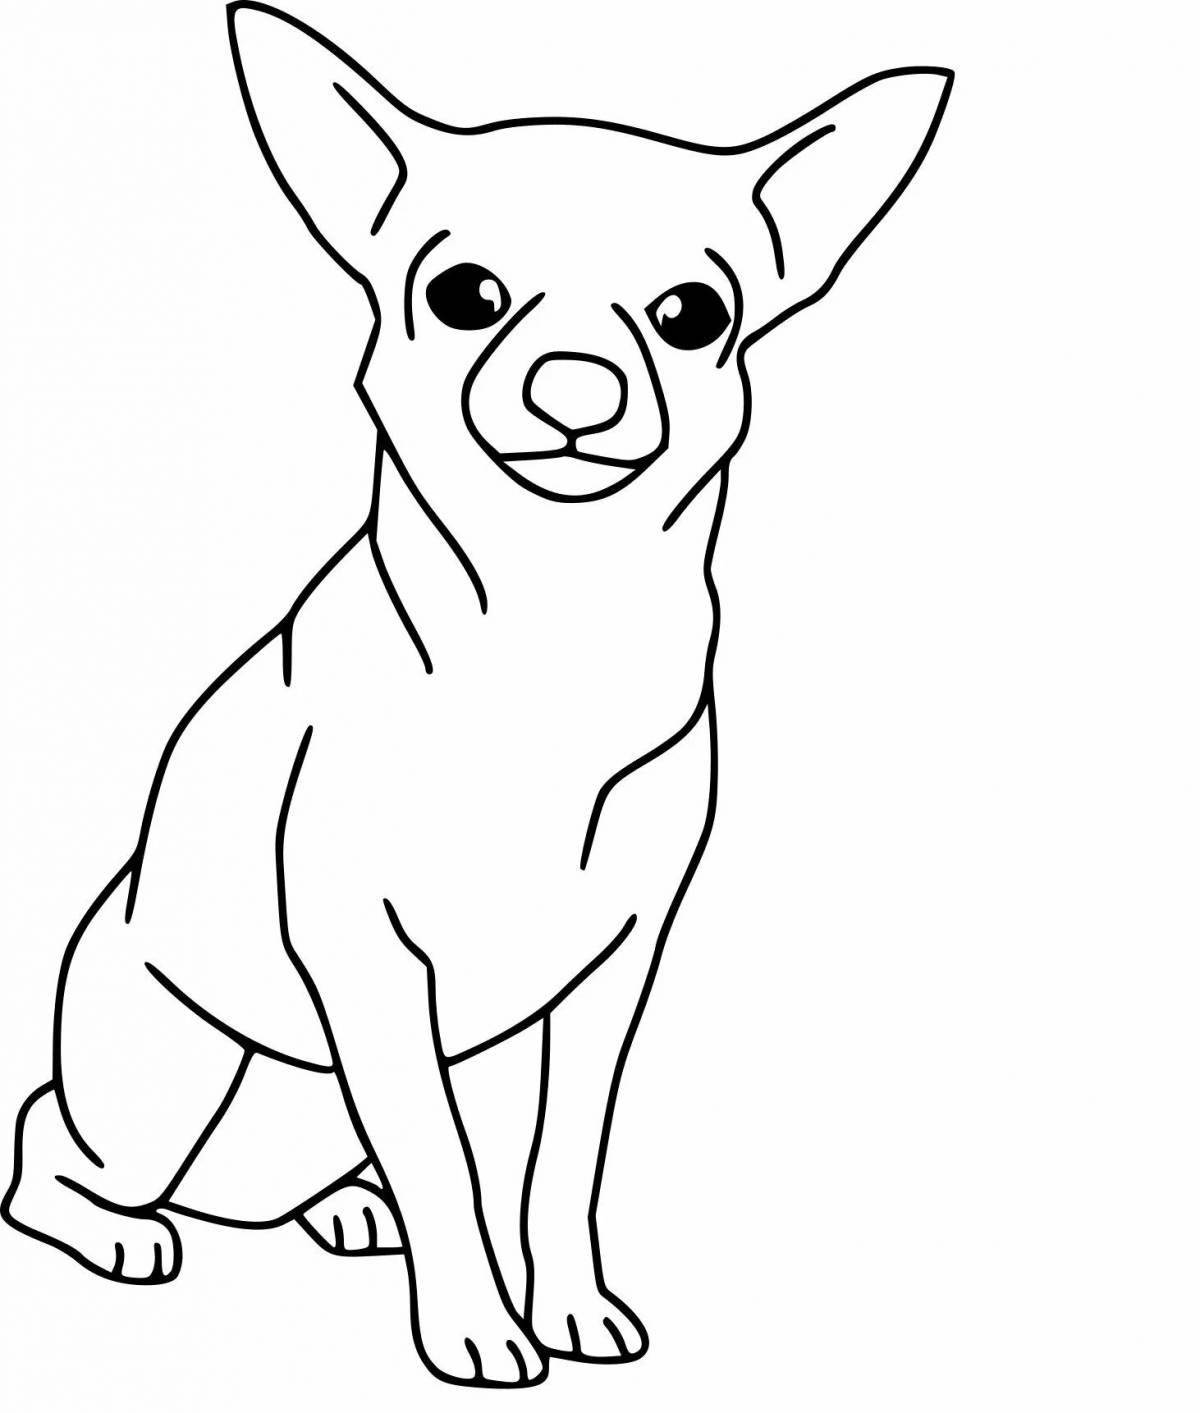 Bright coloring drawing of a dog